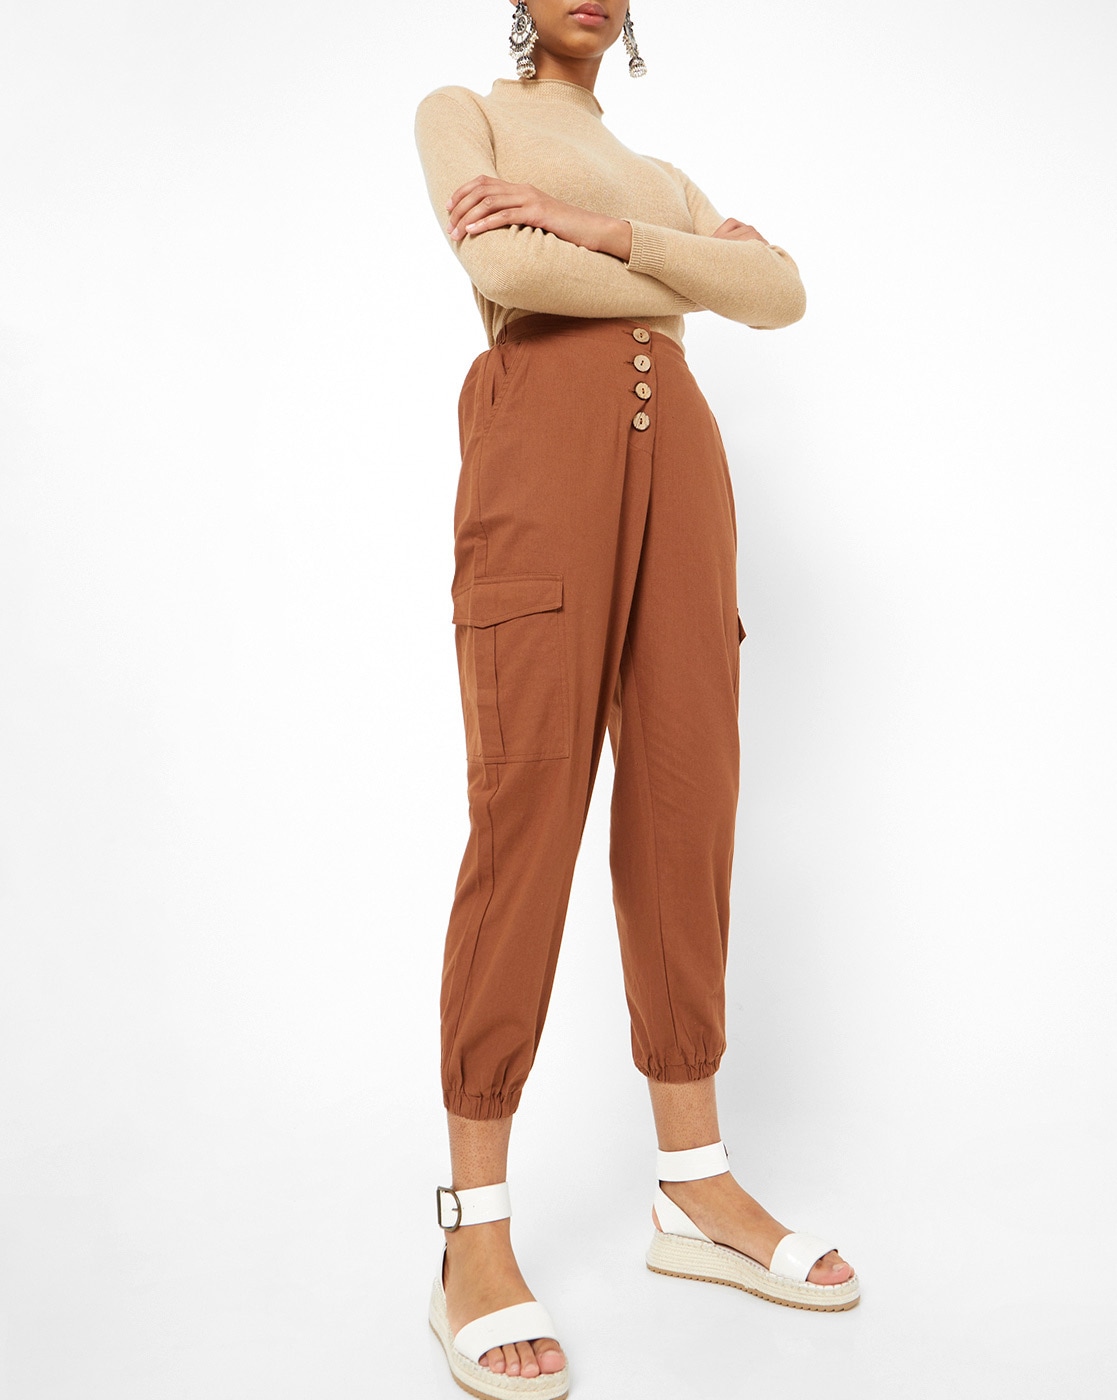 How to Style Camel Trousers  LolarioStyle